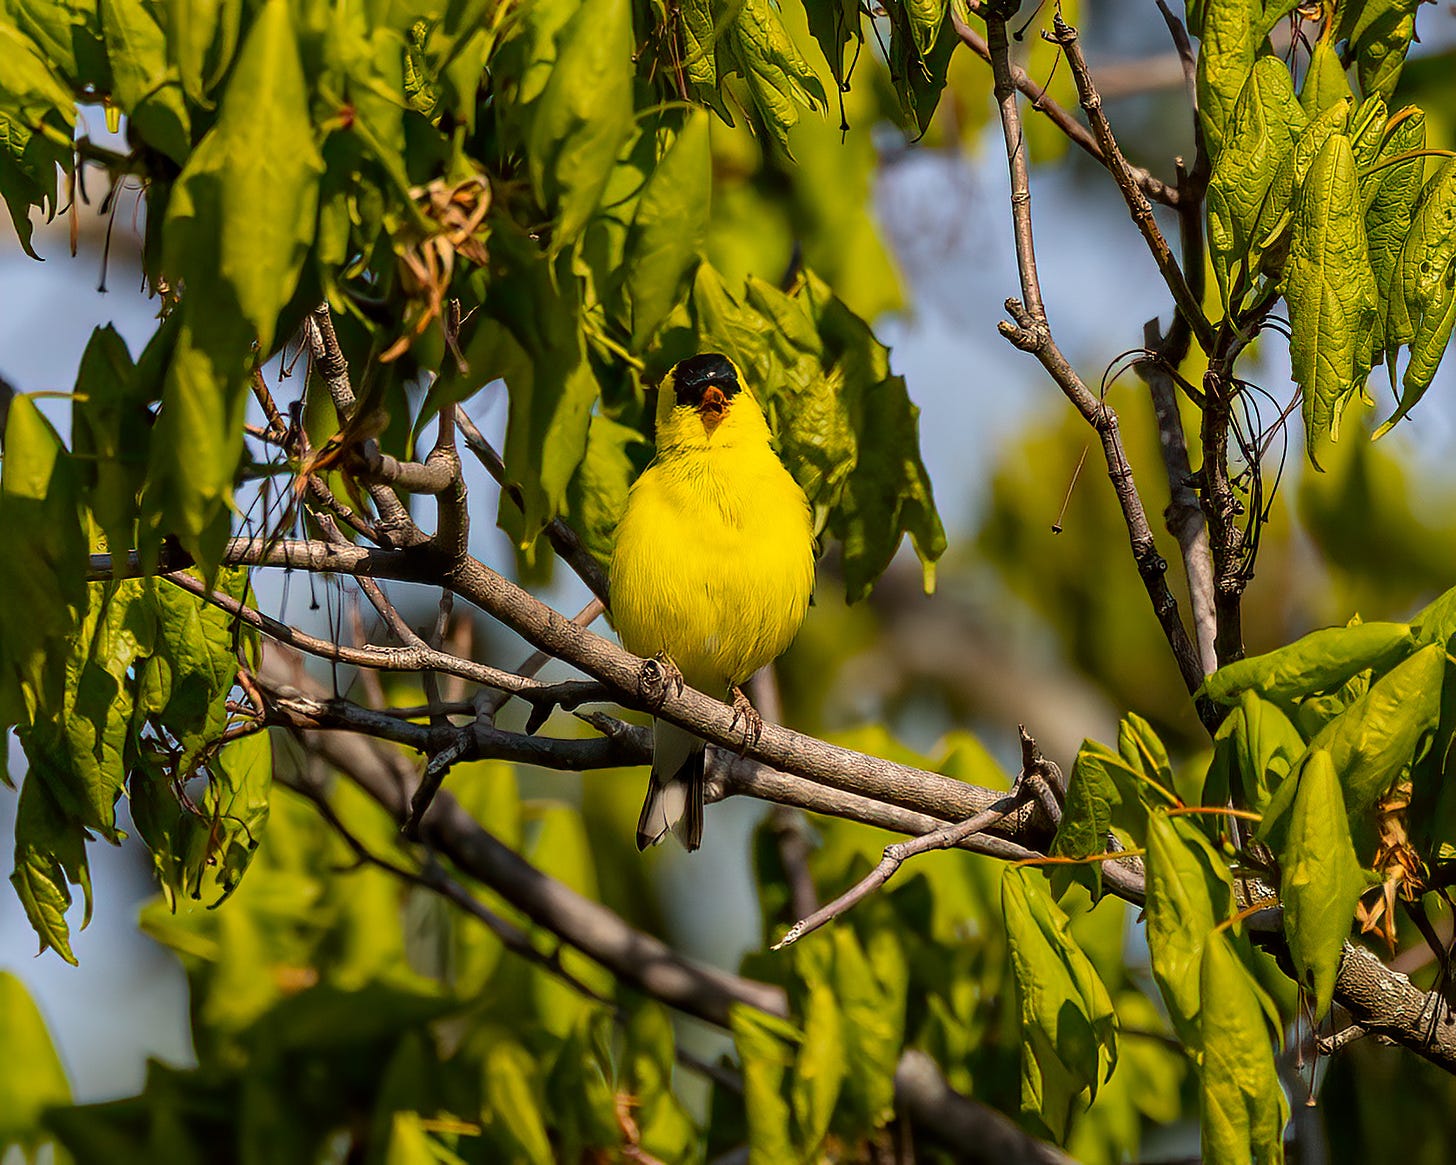 Male goldfinch perched on a branch among unfurling leaves